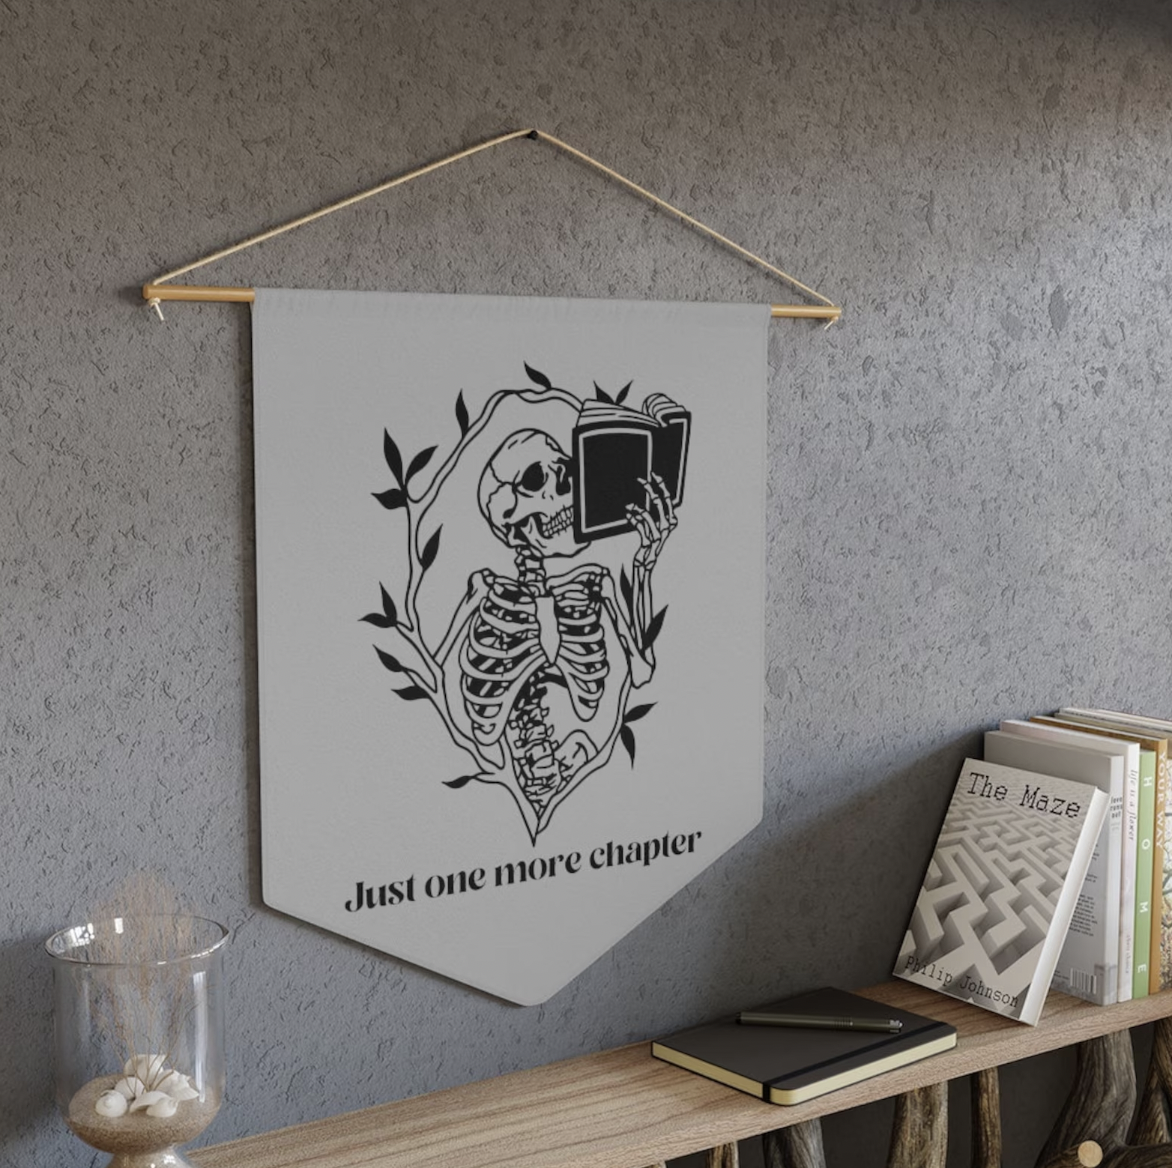 A hanging wall banner with an illustration of a skeleton reading a book and the text "Just one more chapter"